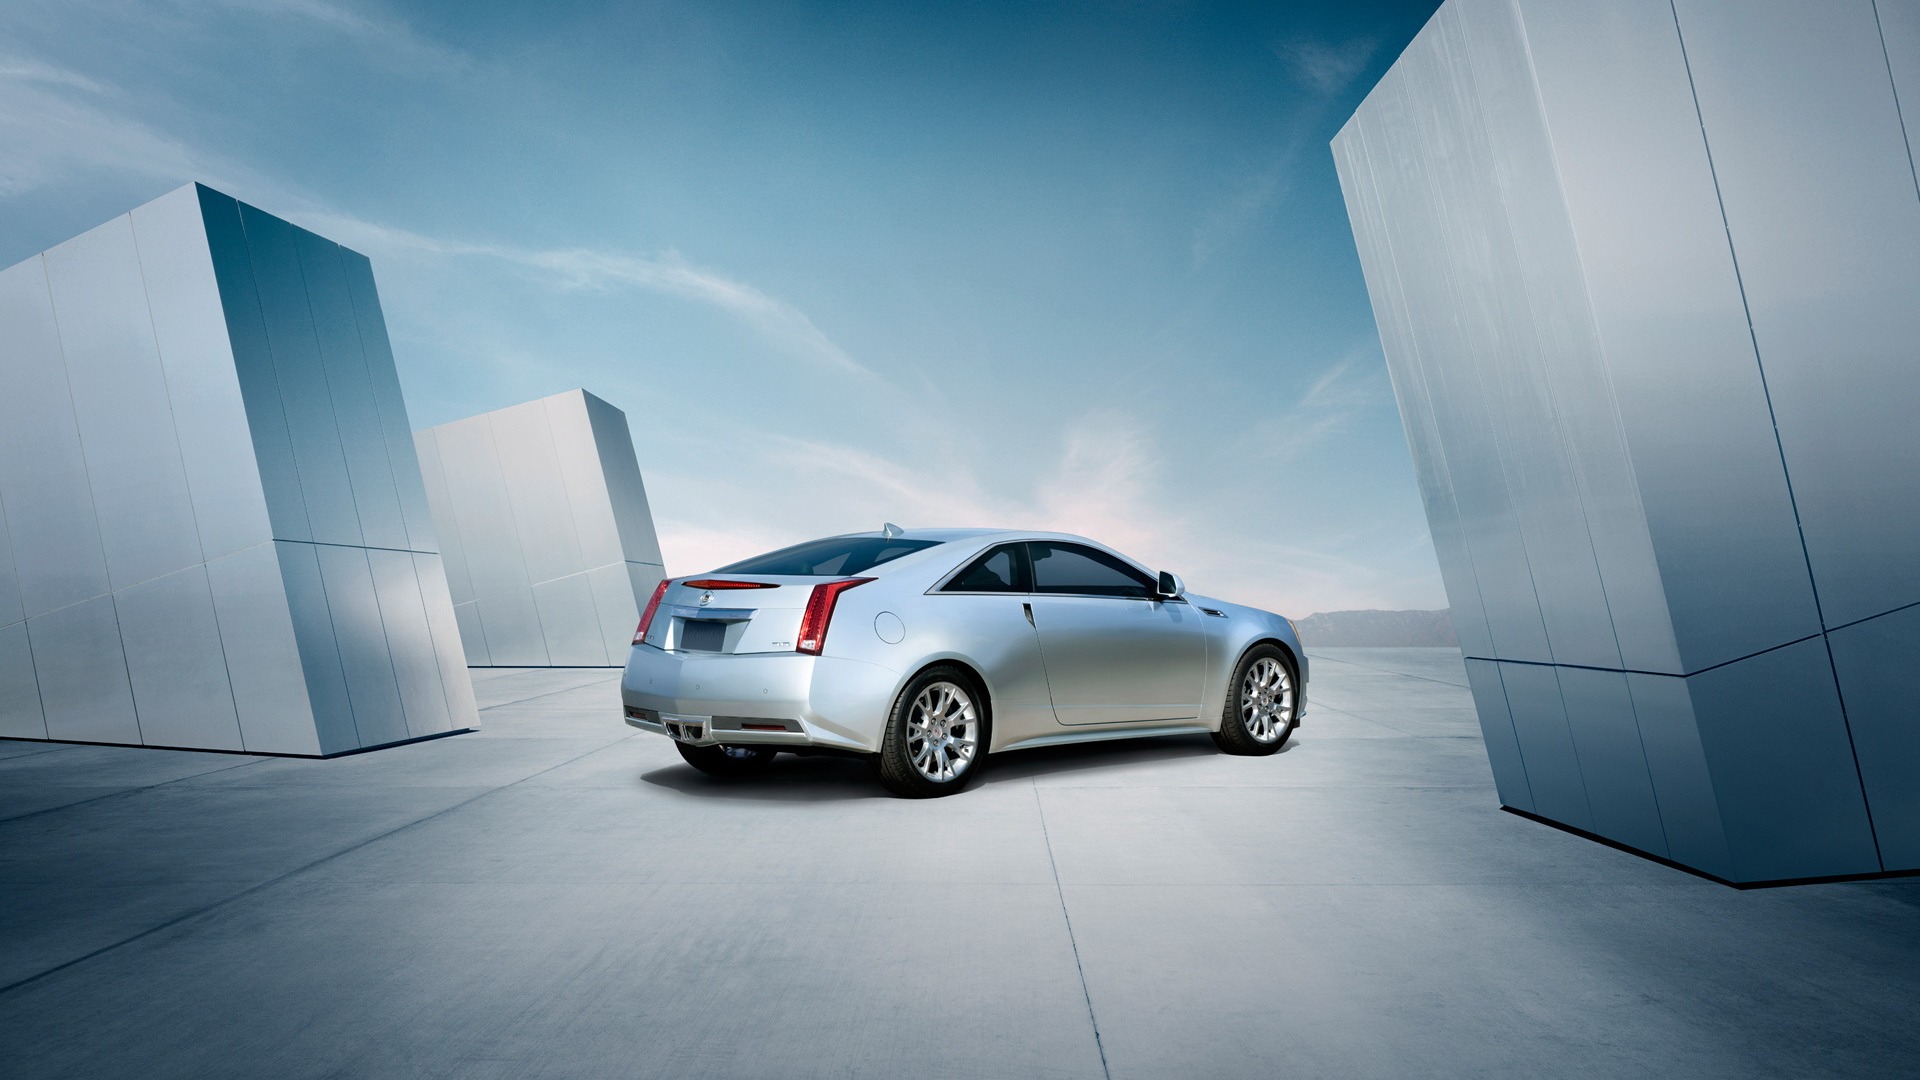 Cadillac CTS Coupe - 2011 HD Wallpaper #3 - 1920x1080